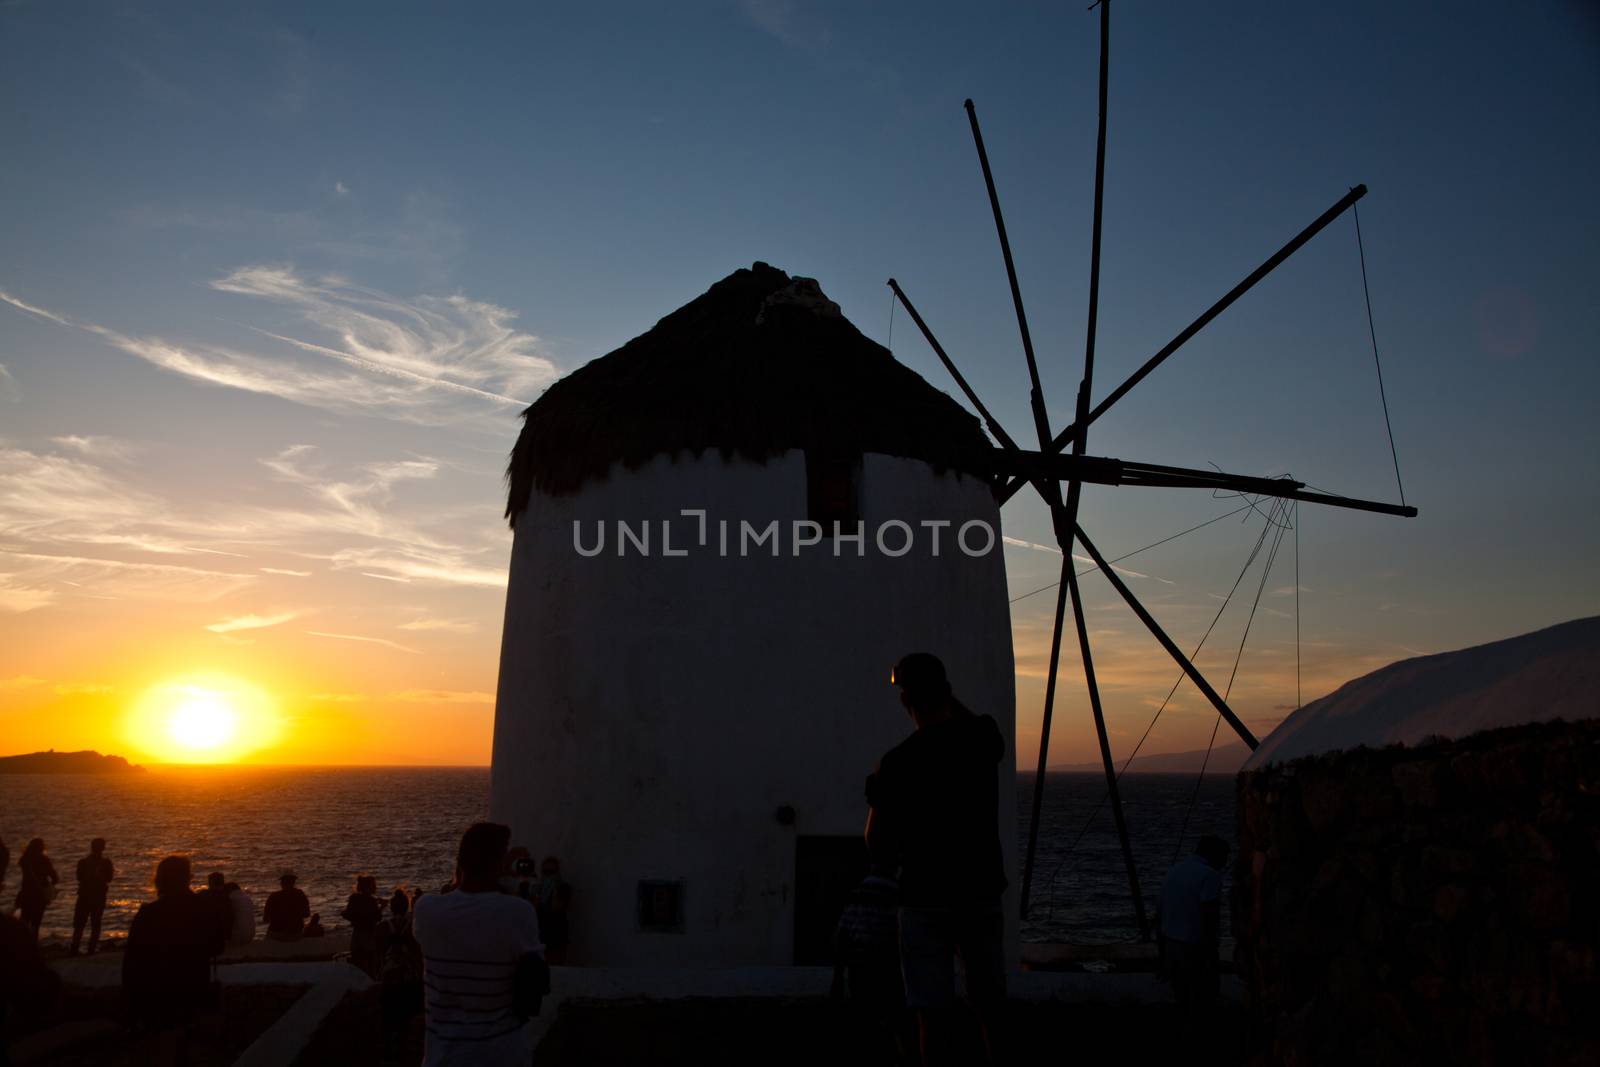 famous view  Traditional windmills on the island Mykonos, Greece by melis